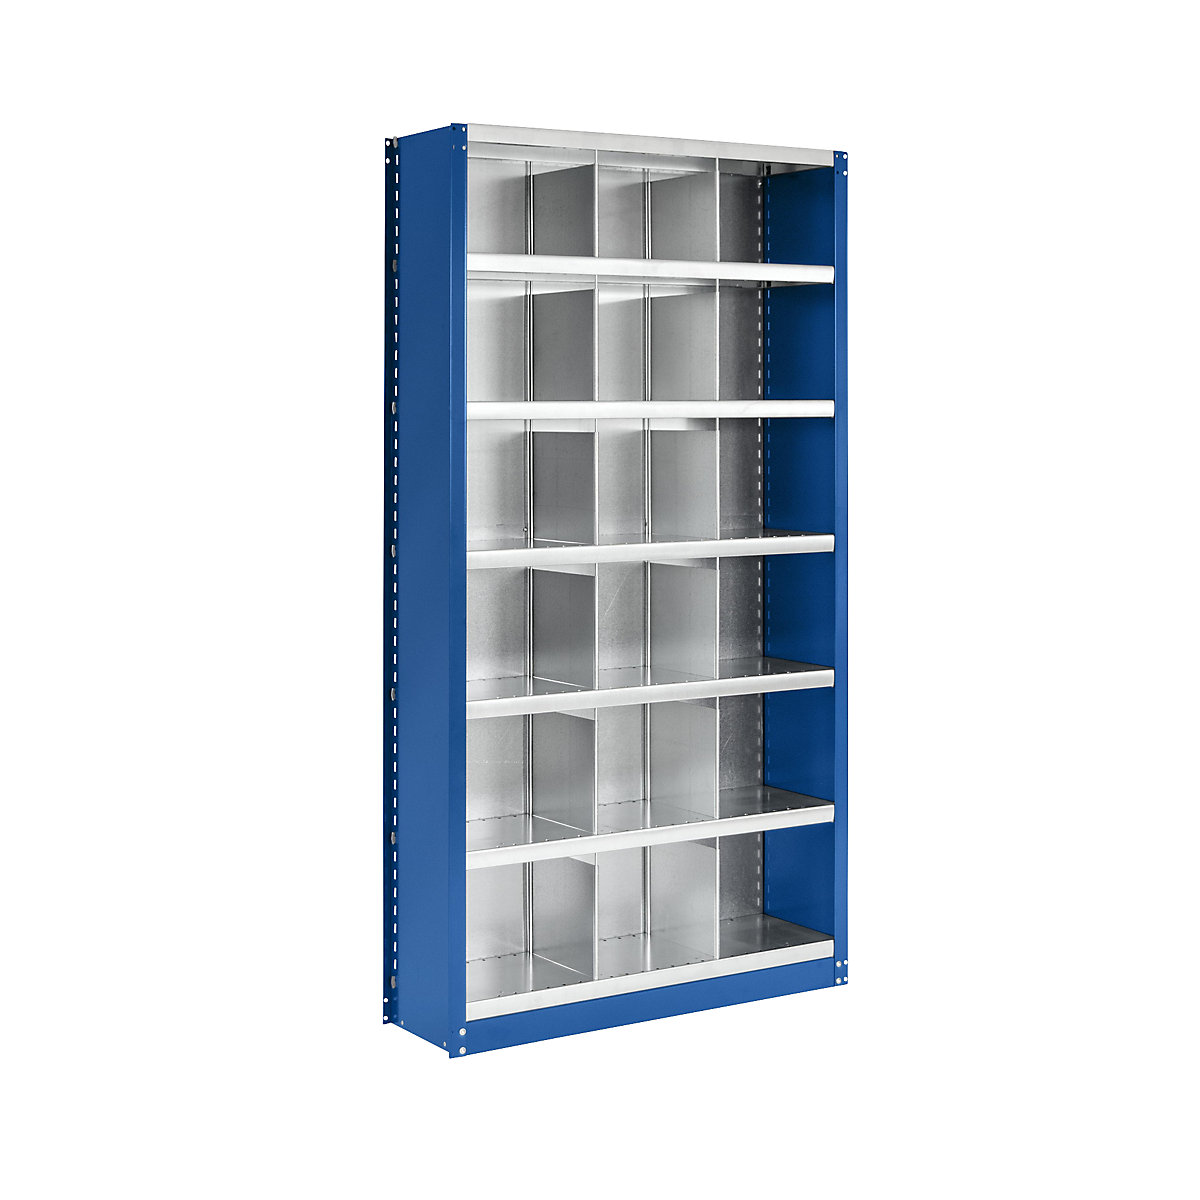 Rayonnage emboîtable modulaire, hauteur 1990 mm – eurokraft pro, 18 casiers, l x p 1000 x 300 mm, rayonnage additionnel, bleu gentiane RAL 5010-1